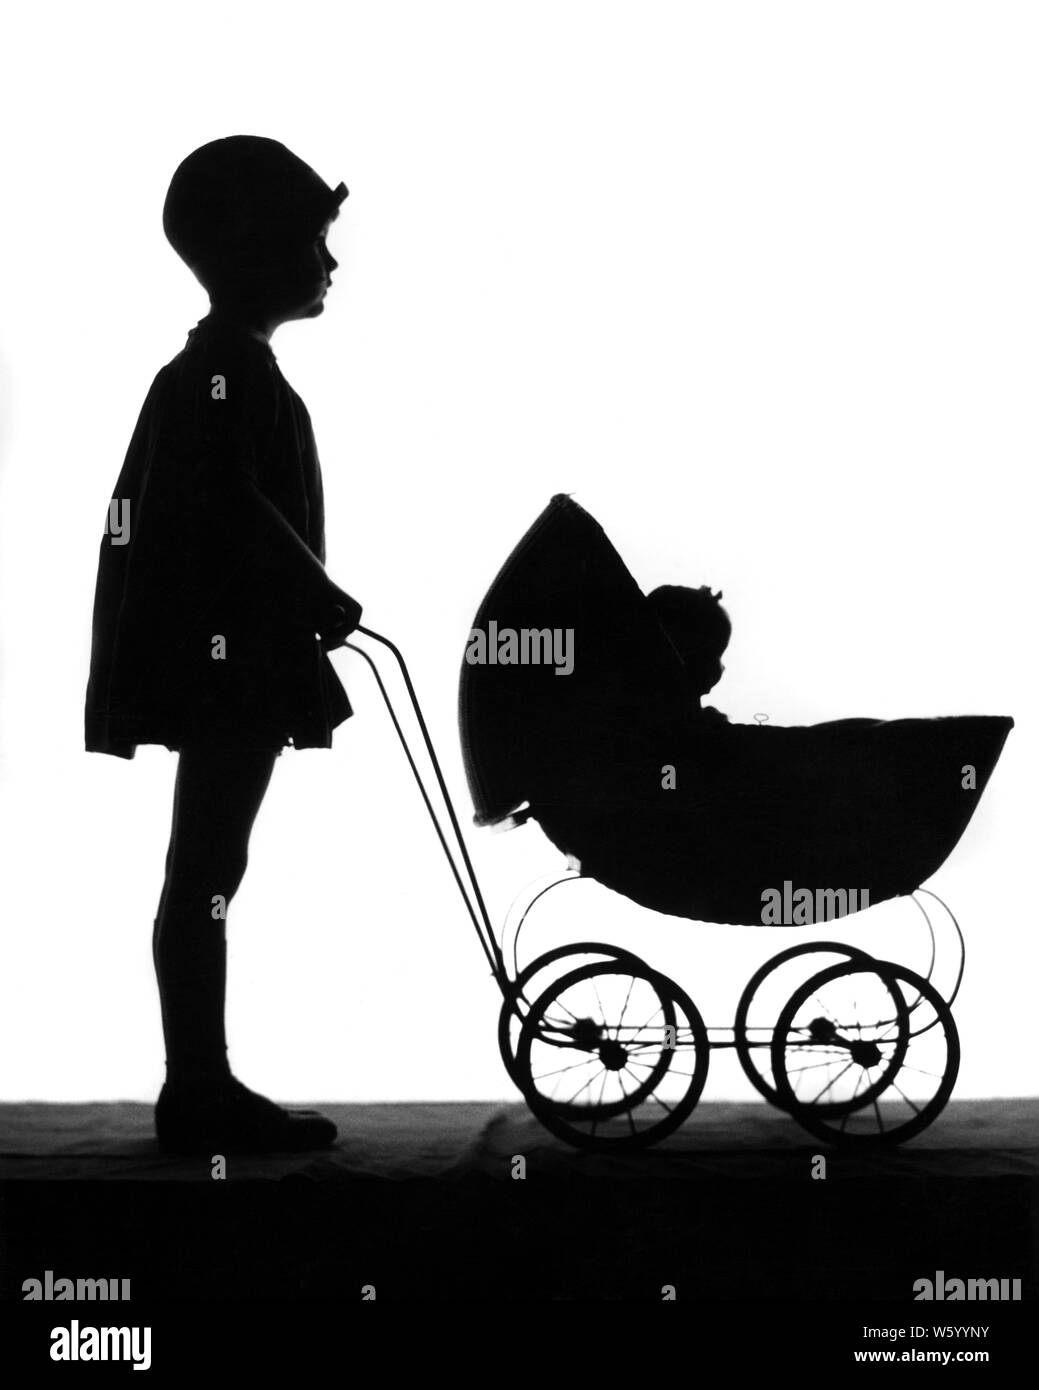 1920s ANONYMOUS SILHOUETTE OF LITTLE GIRL WEARING CLOCHE HAT PUSHING BABY DOLL IN BABY CARRIAGE - s1710 HAR001 HARS TRANSPORTATION B&W CARRIAGE DREAMS HAPPINESS LEISURE SILHOUETTED RECREATION CLOCHE IN OF CONNECTION CONCEPTUAL STYLISH ANONYMOUS BABY DOLL GROWTH JUVENILES RELAXATION TOGETHERNESS BABY CARRIAGE BLACK AND WHITE HAR001 OLD FASHIONED Stock Photo